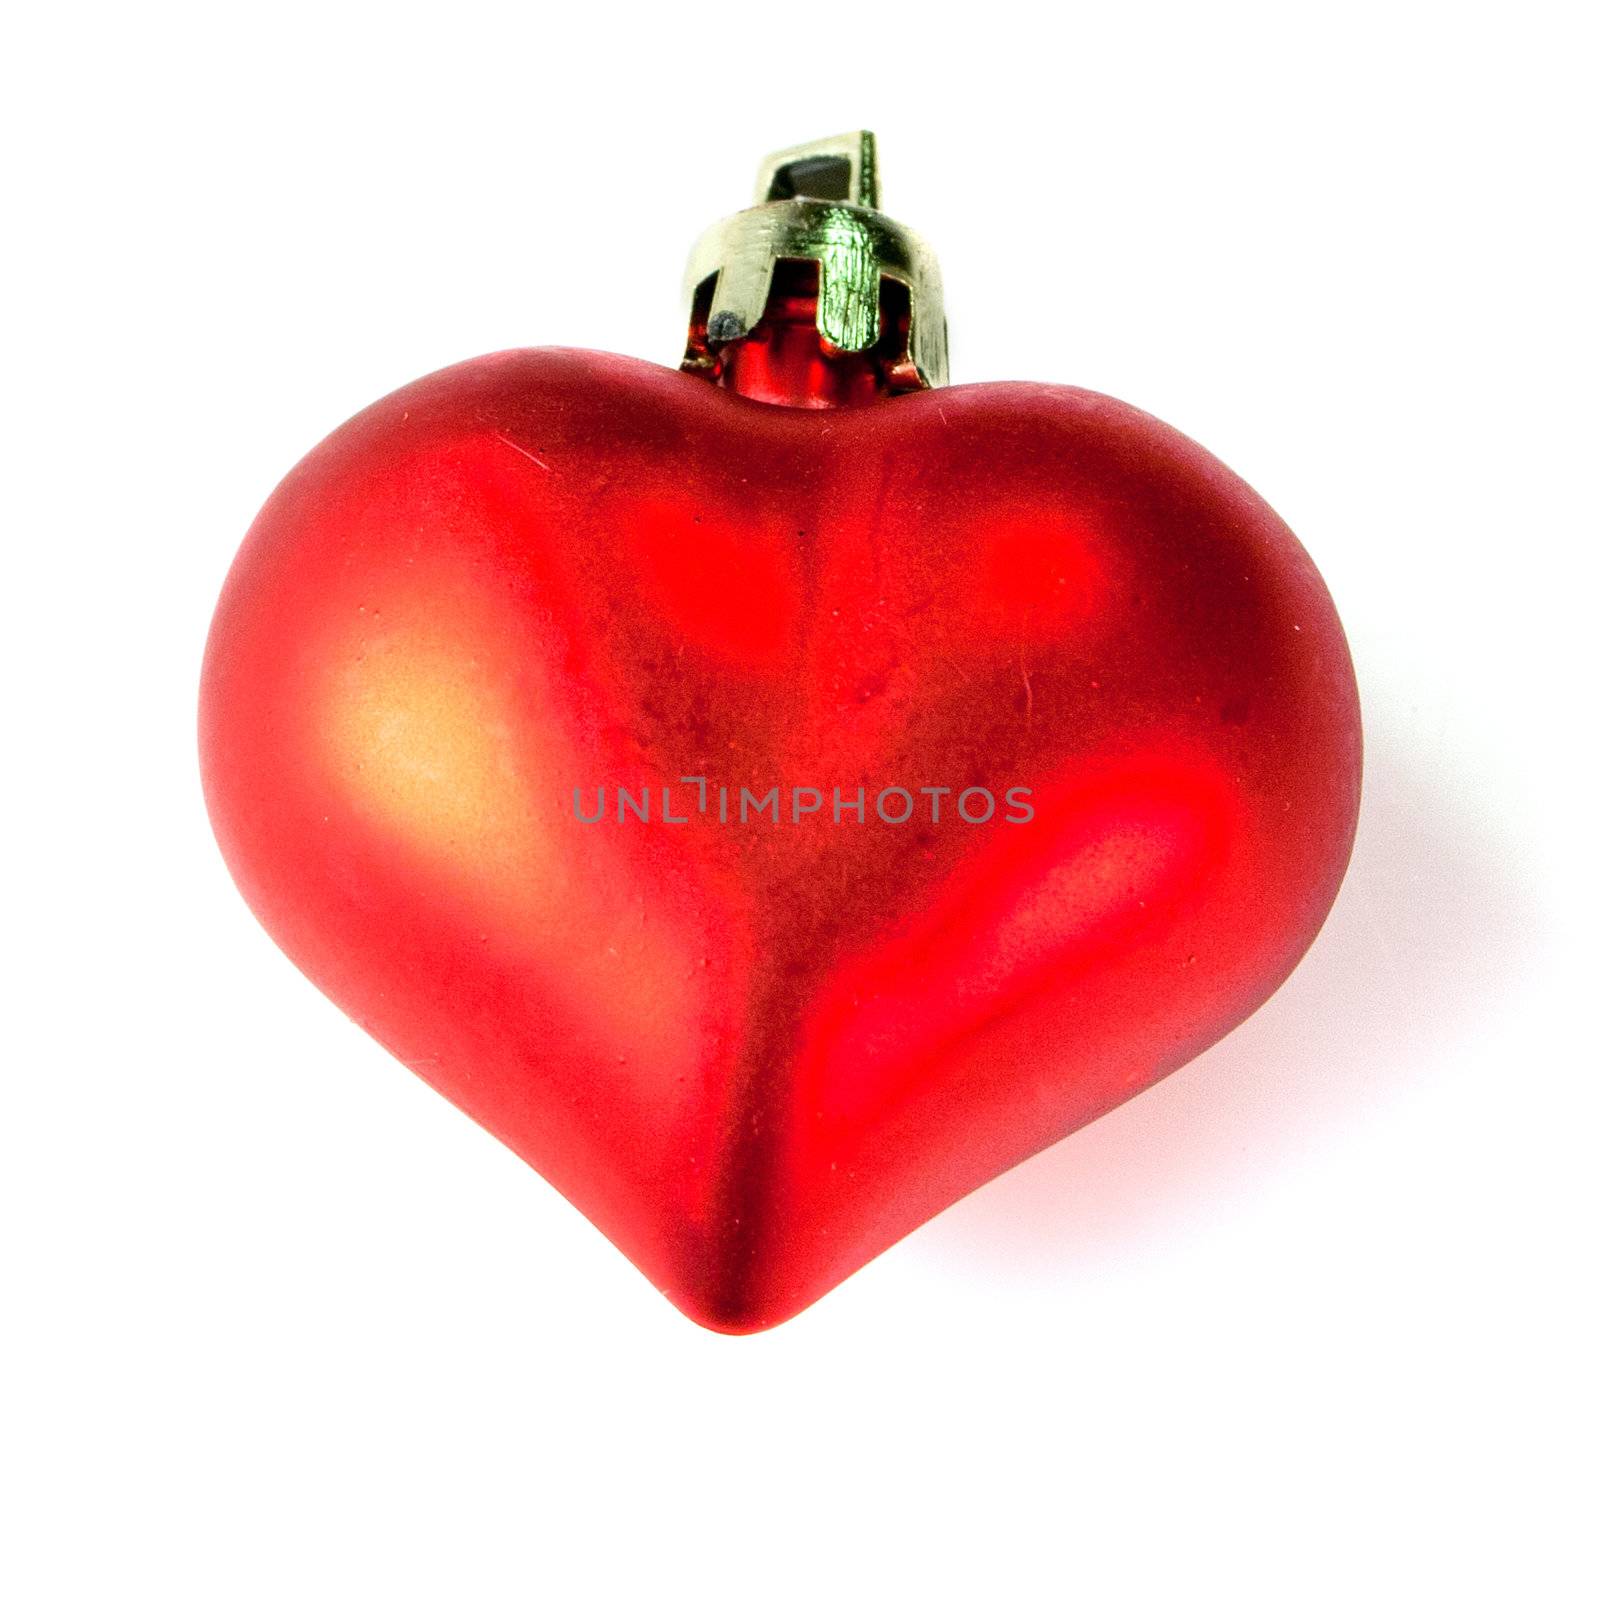 Little red xmas tree heart on a white background